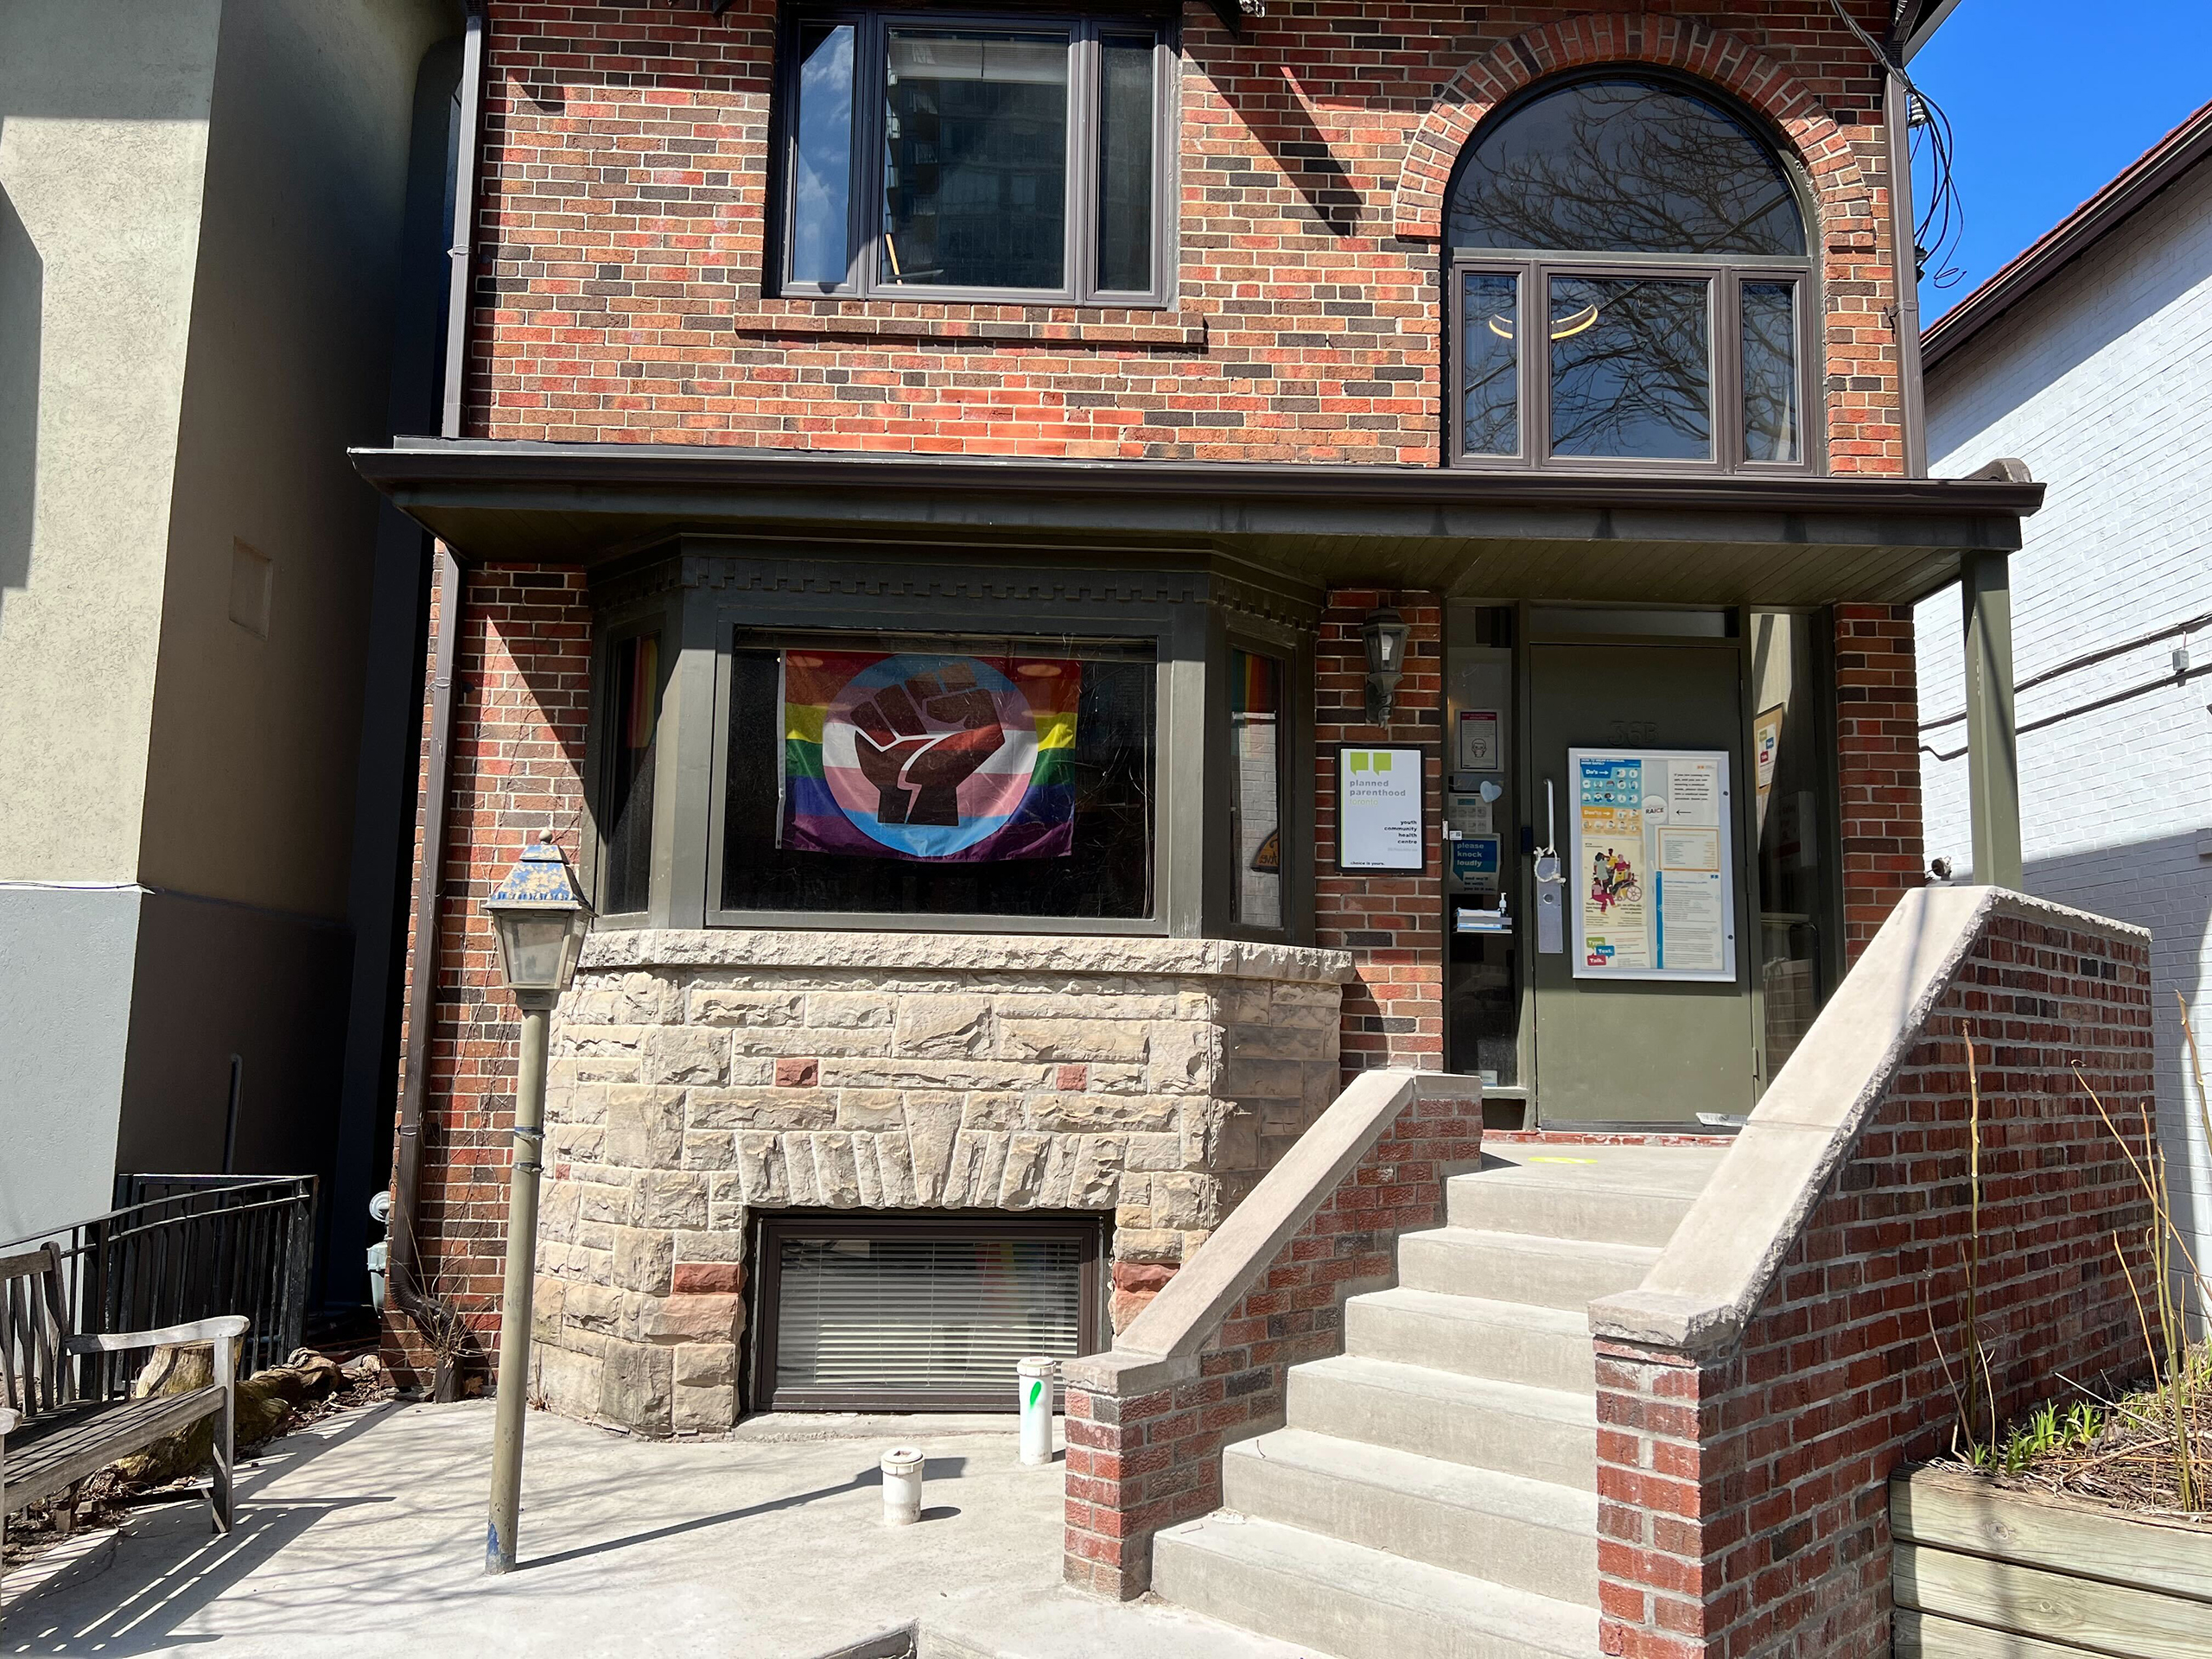 The PPT Headquarters on a sunny day: a brick house with an arched window and a Pride Power flag in the front window.